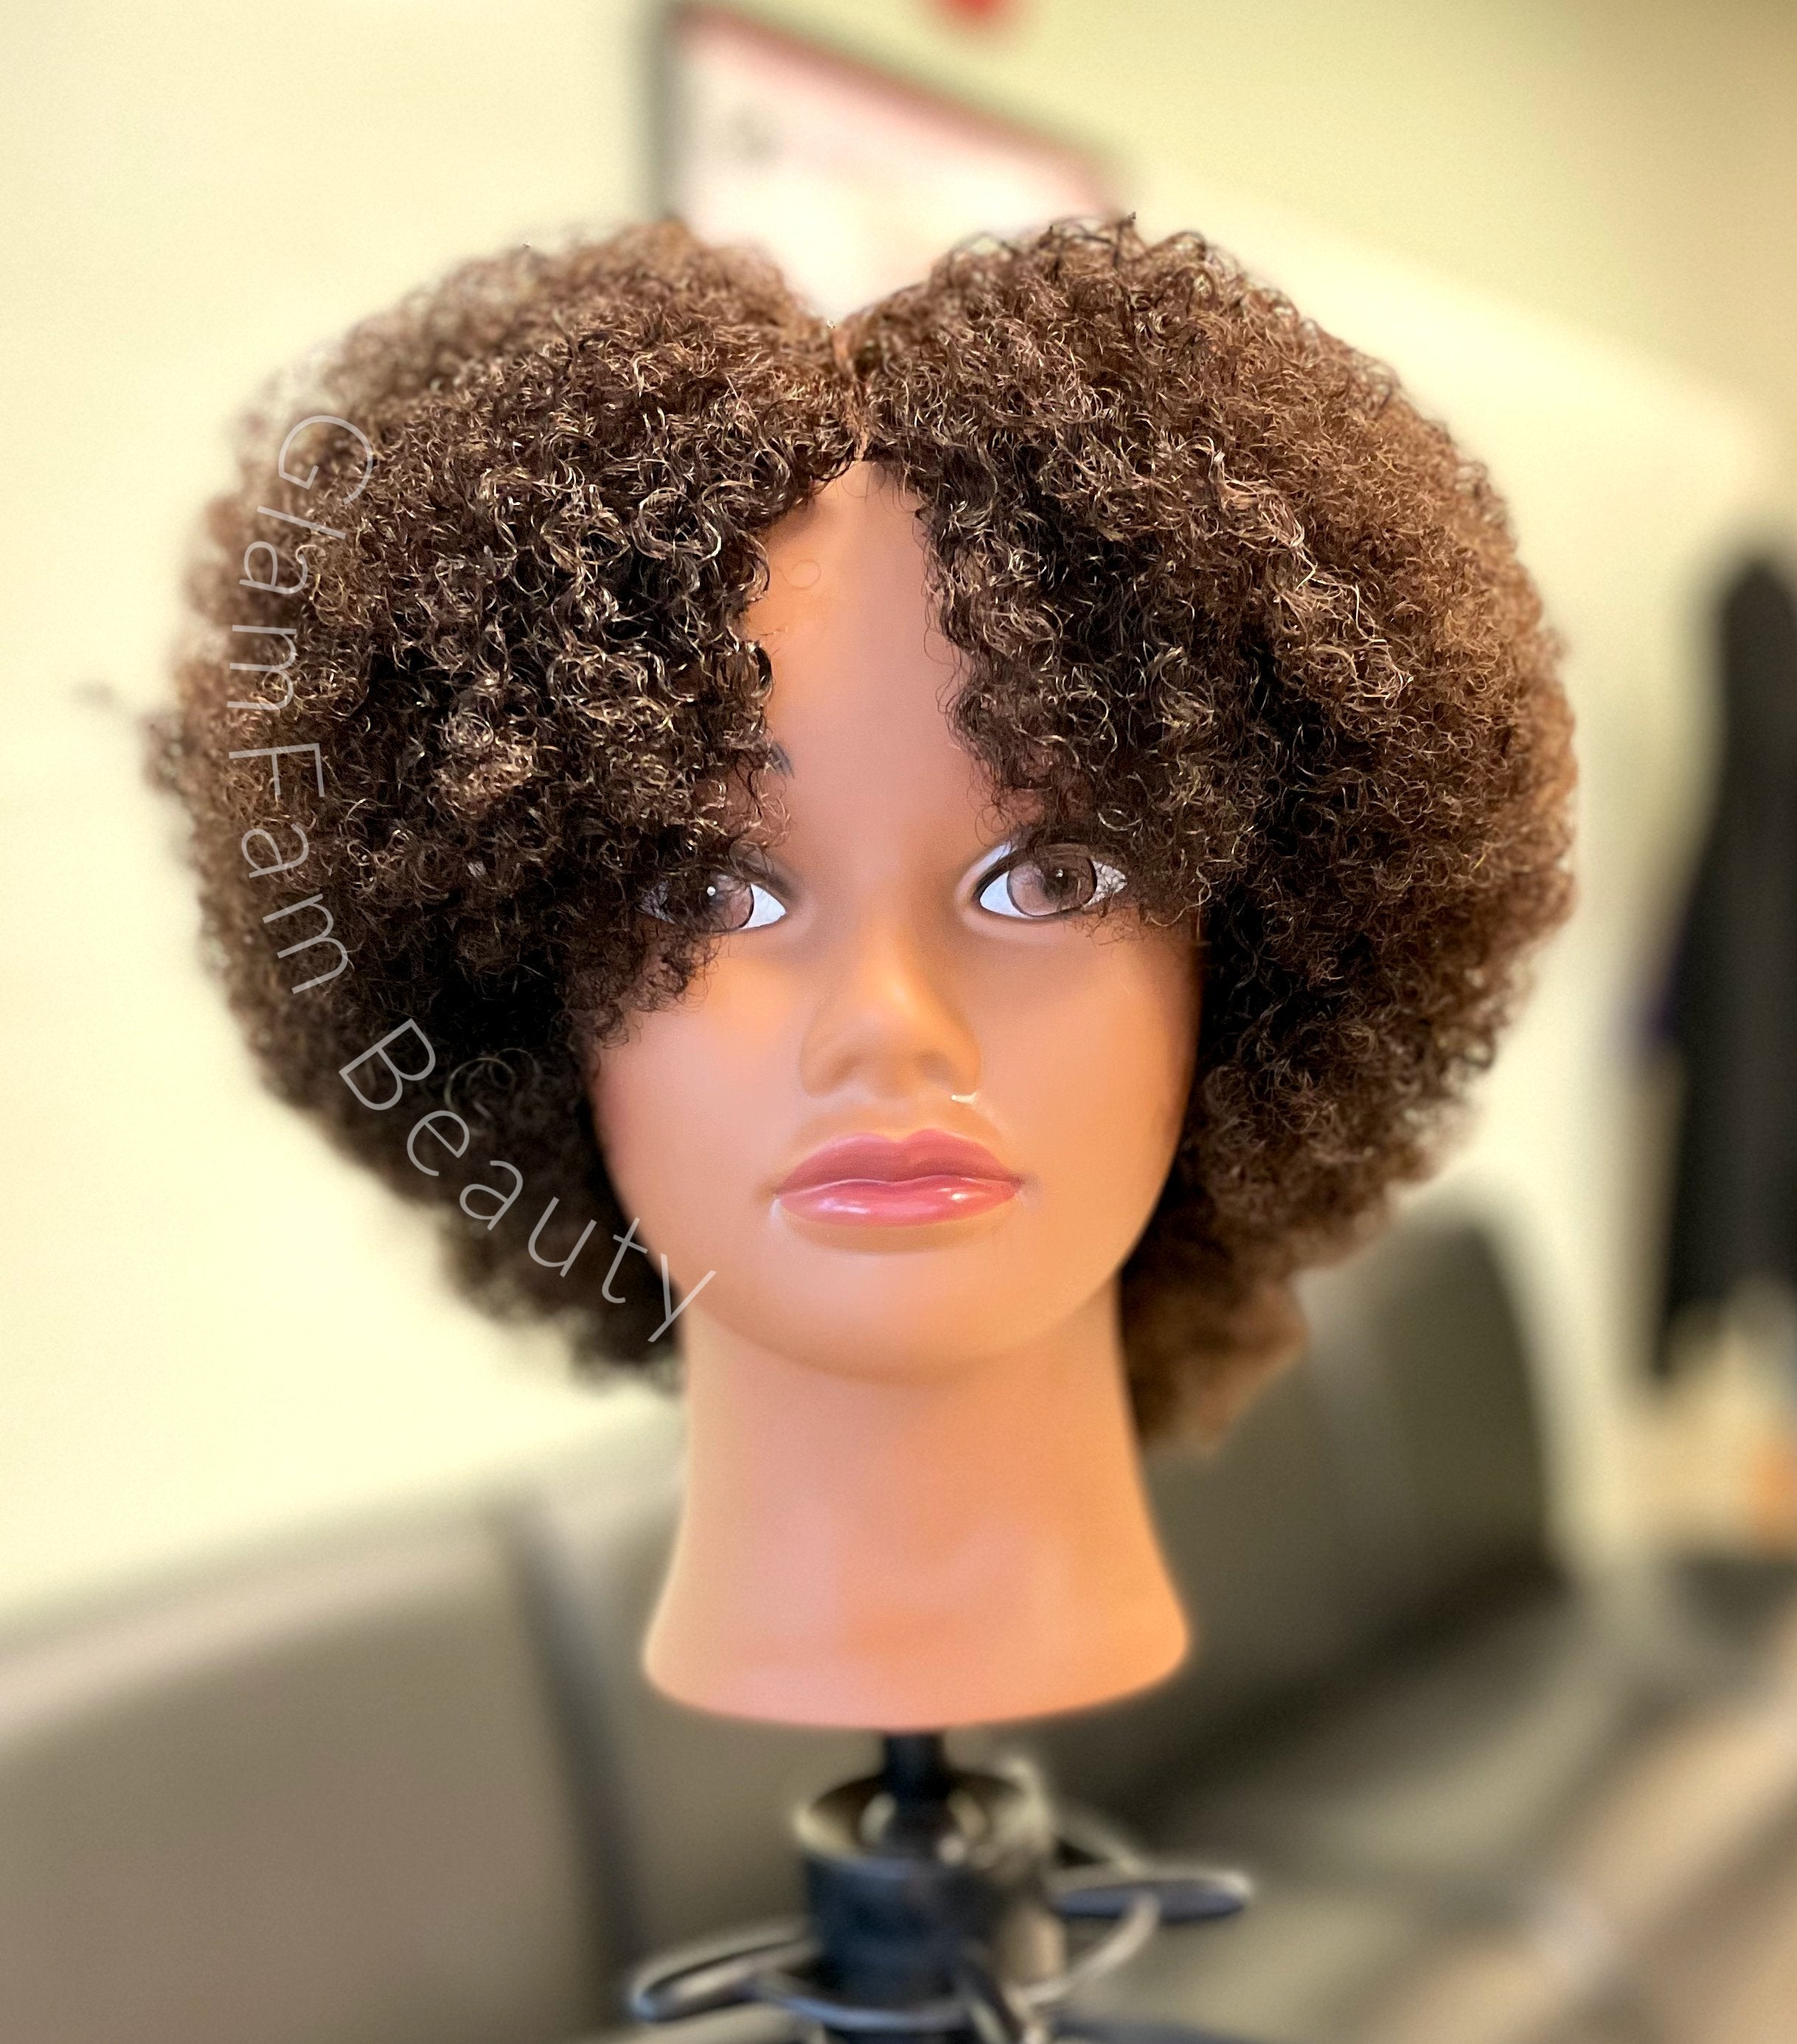 How To Wash Your Curly Mannequin Head 